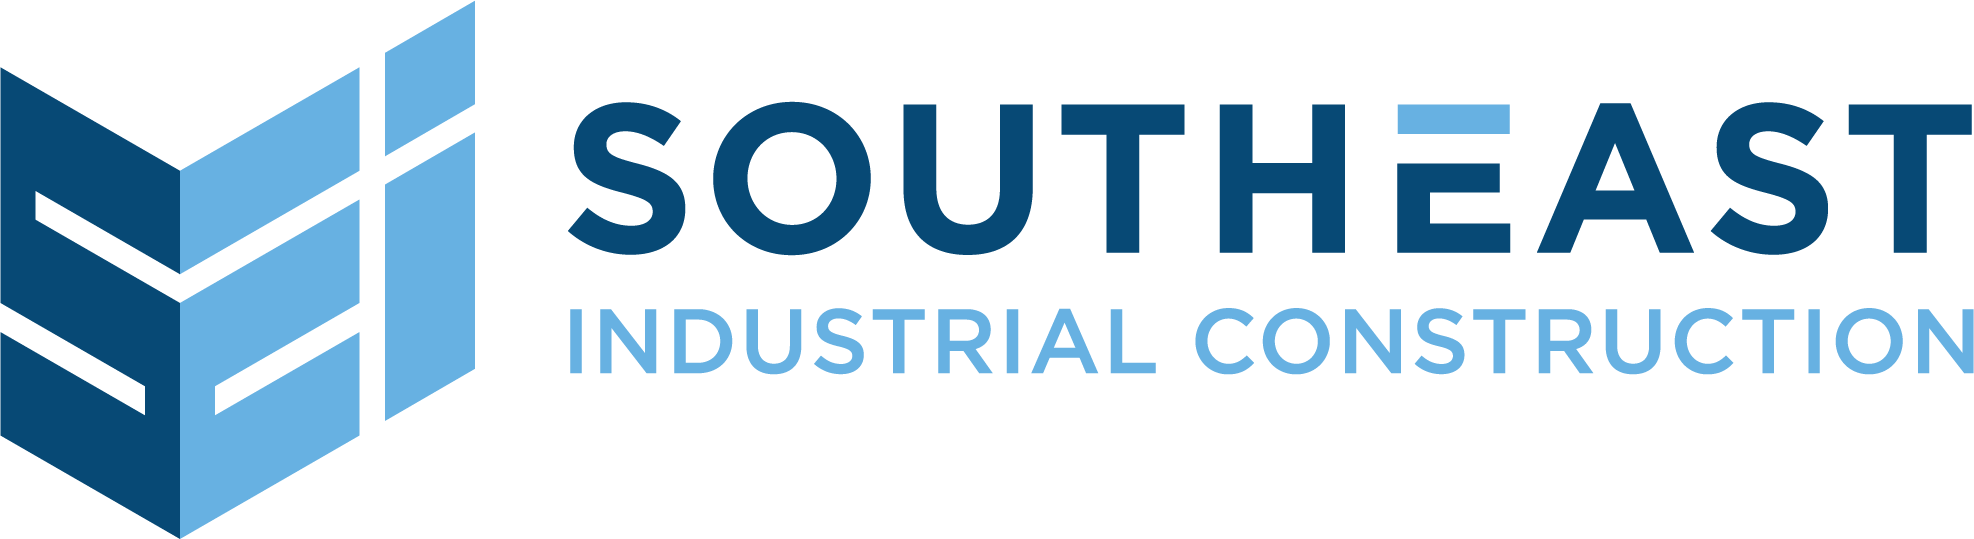 Southeast Industrial Construction